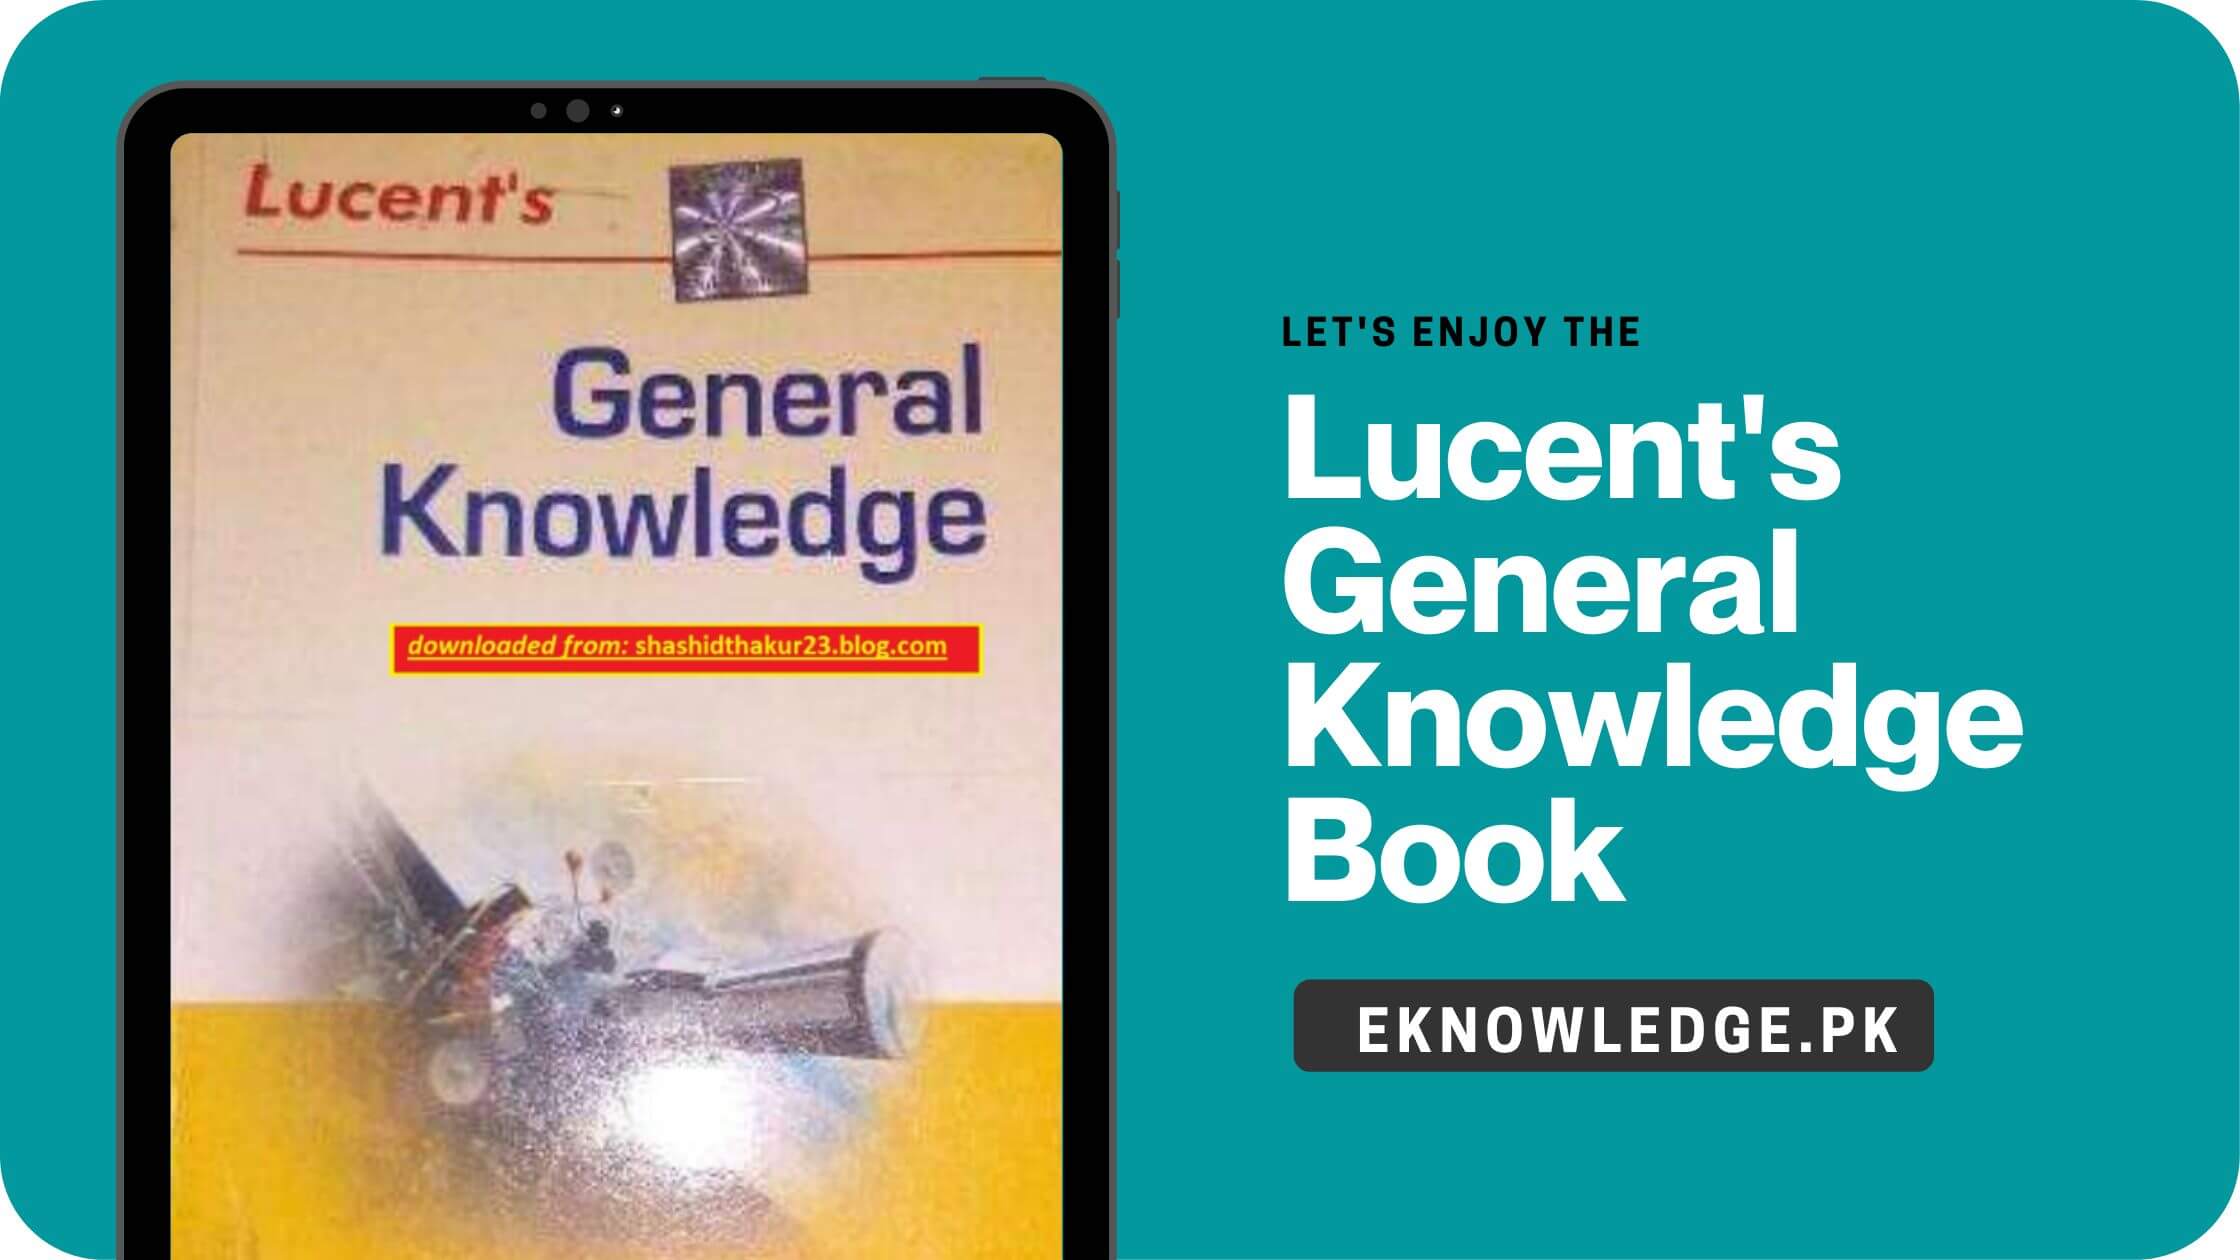 Lucent-general-knowledge-book